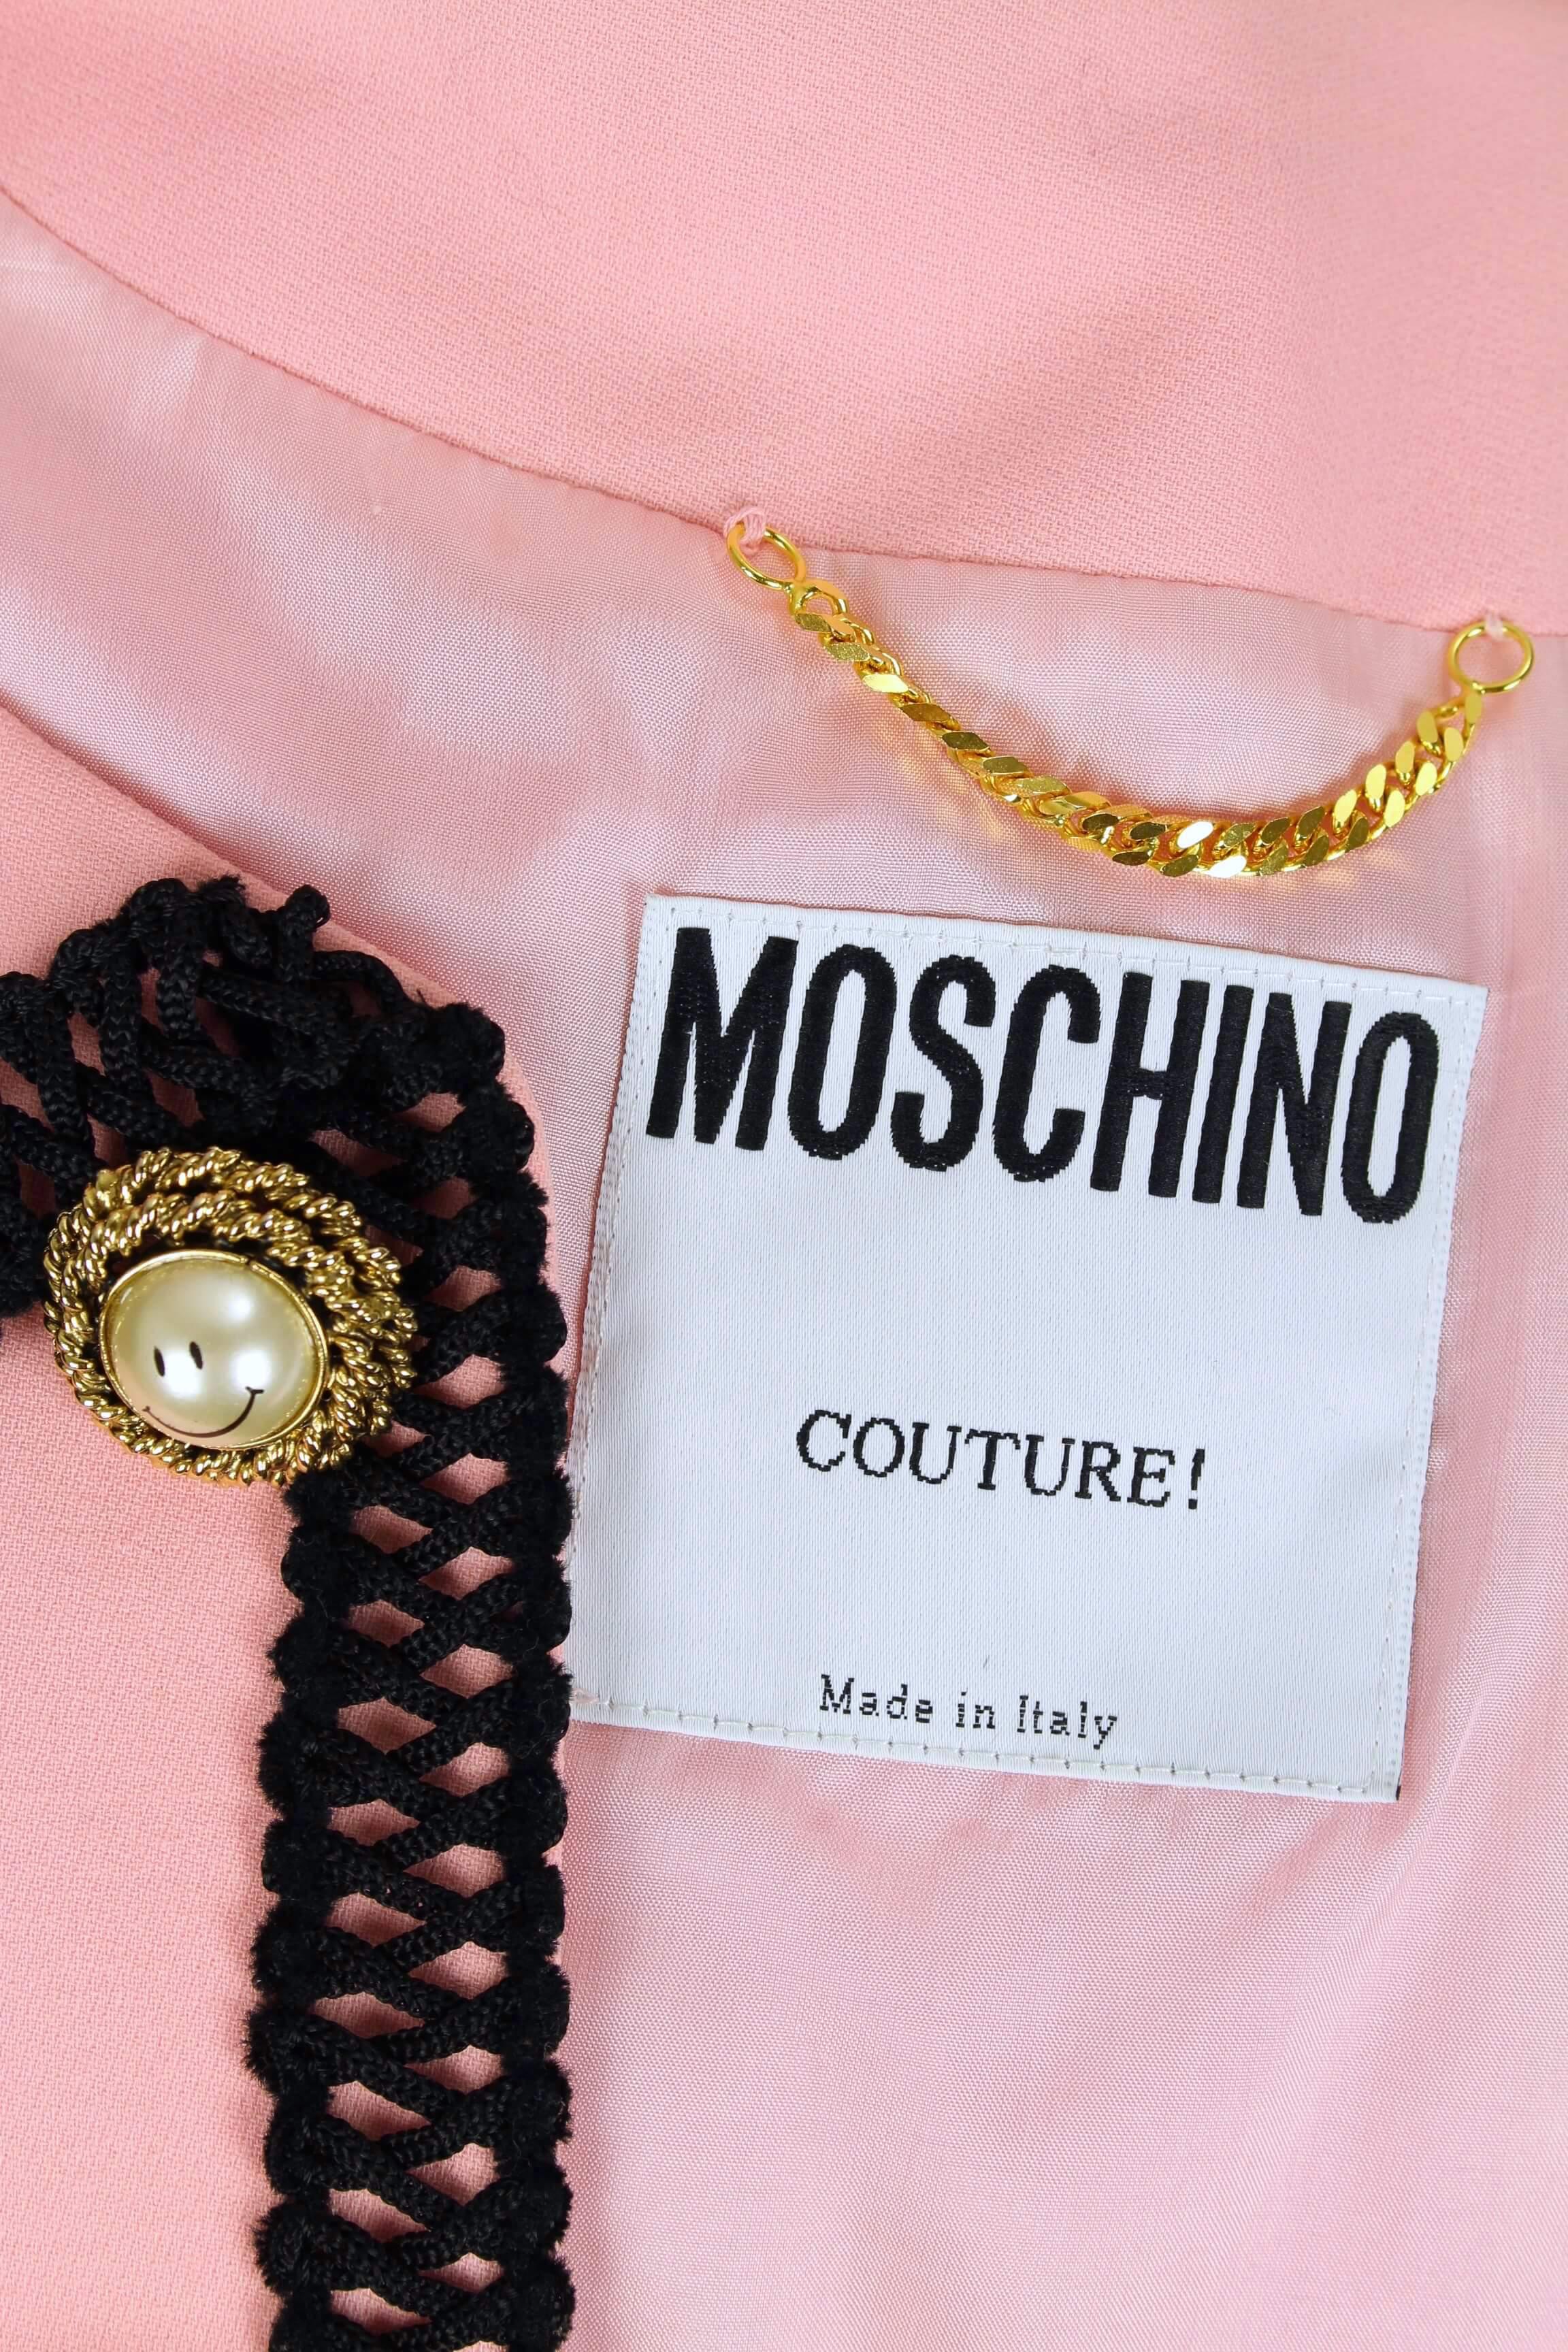 MOSCHINO COUTURE! Pink Wool Smiley Face Buttons Chanel Inspired Jacket, c. 1992 5